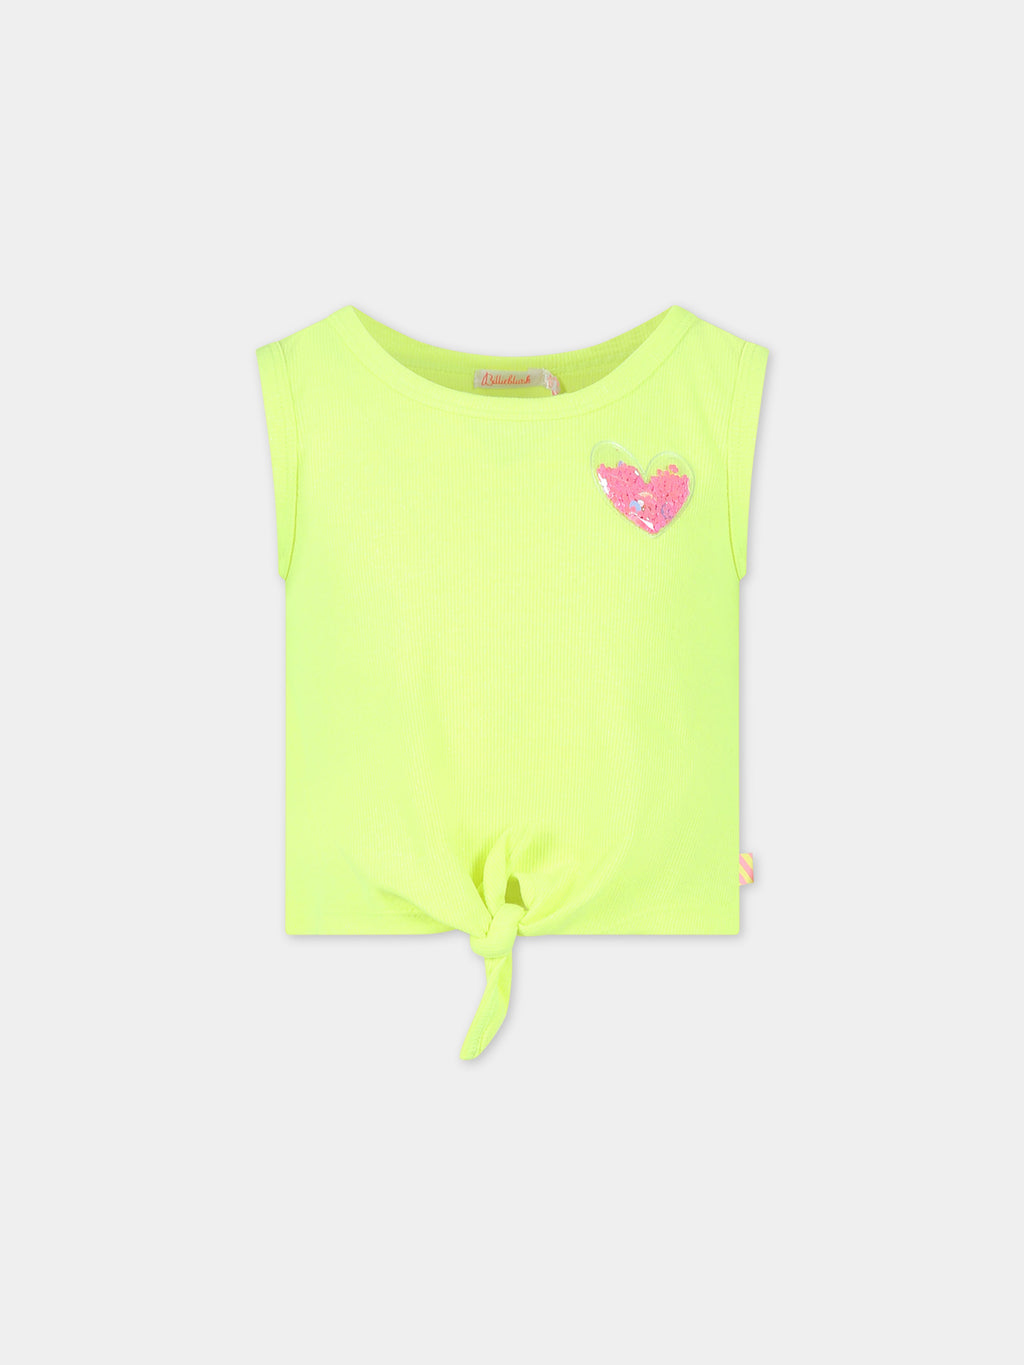 Yellow tank top for girl with heart-shaped bagde